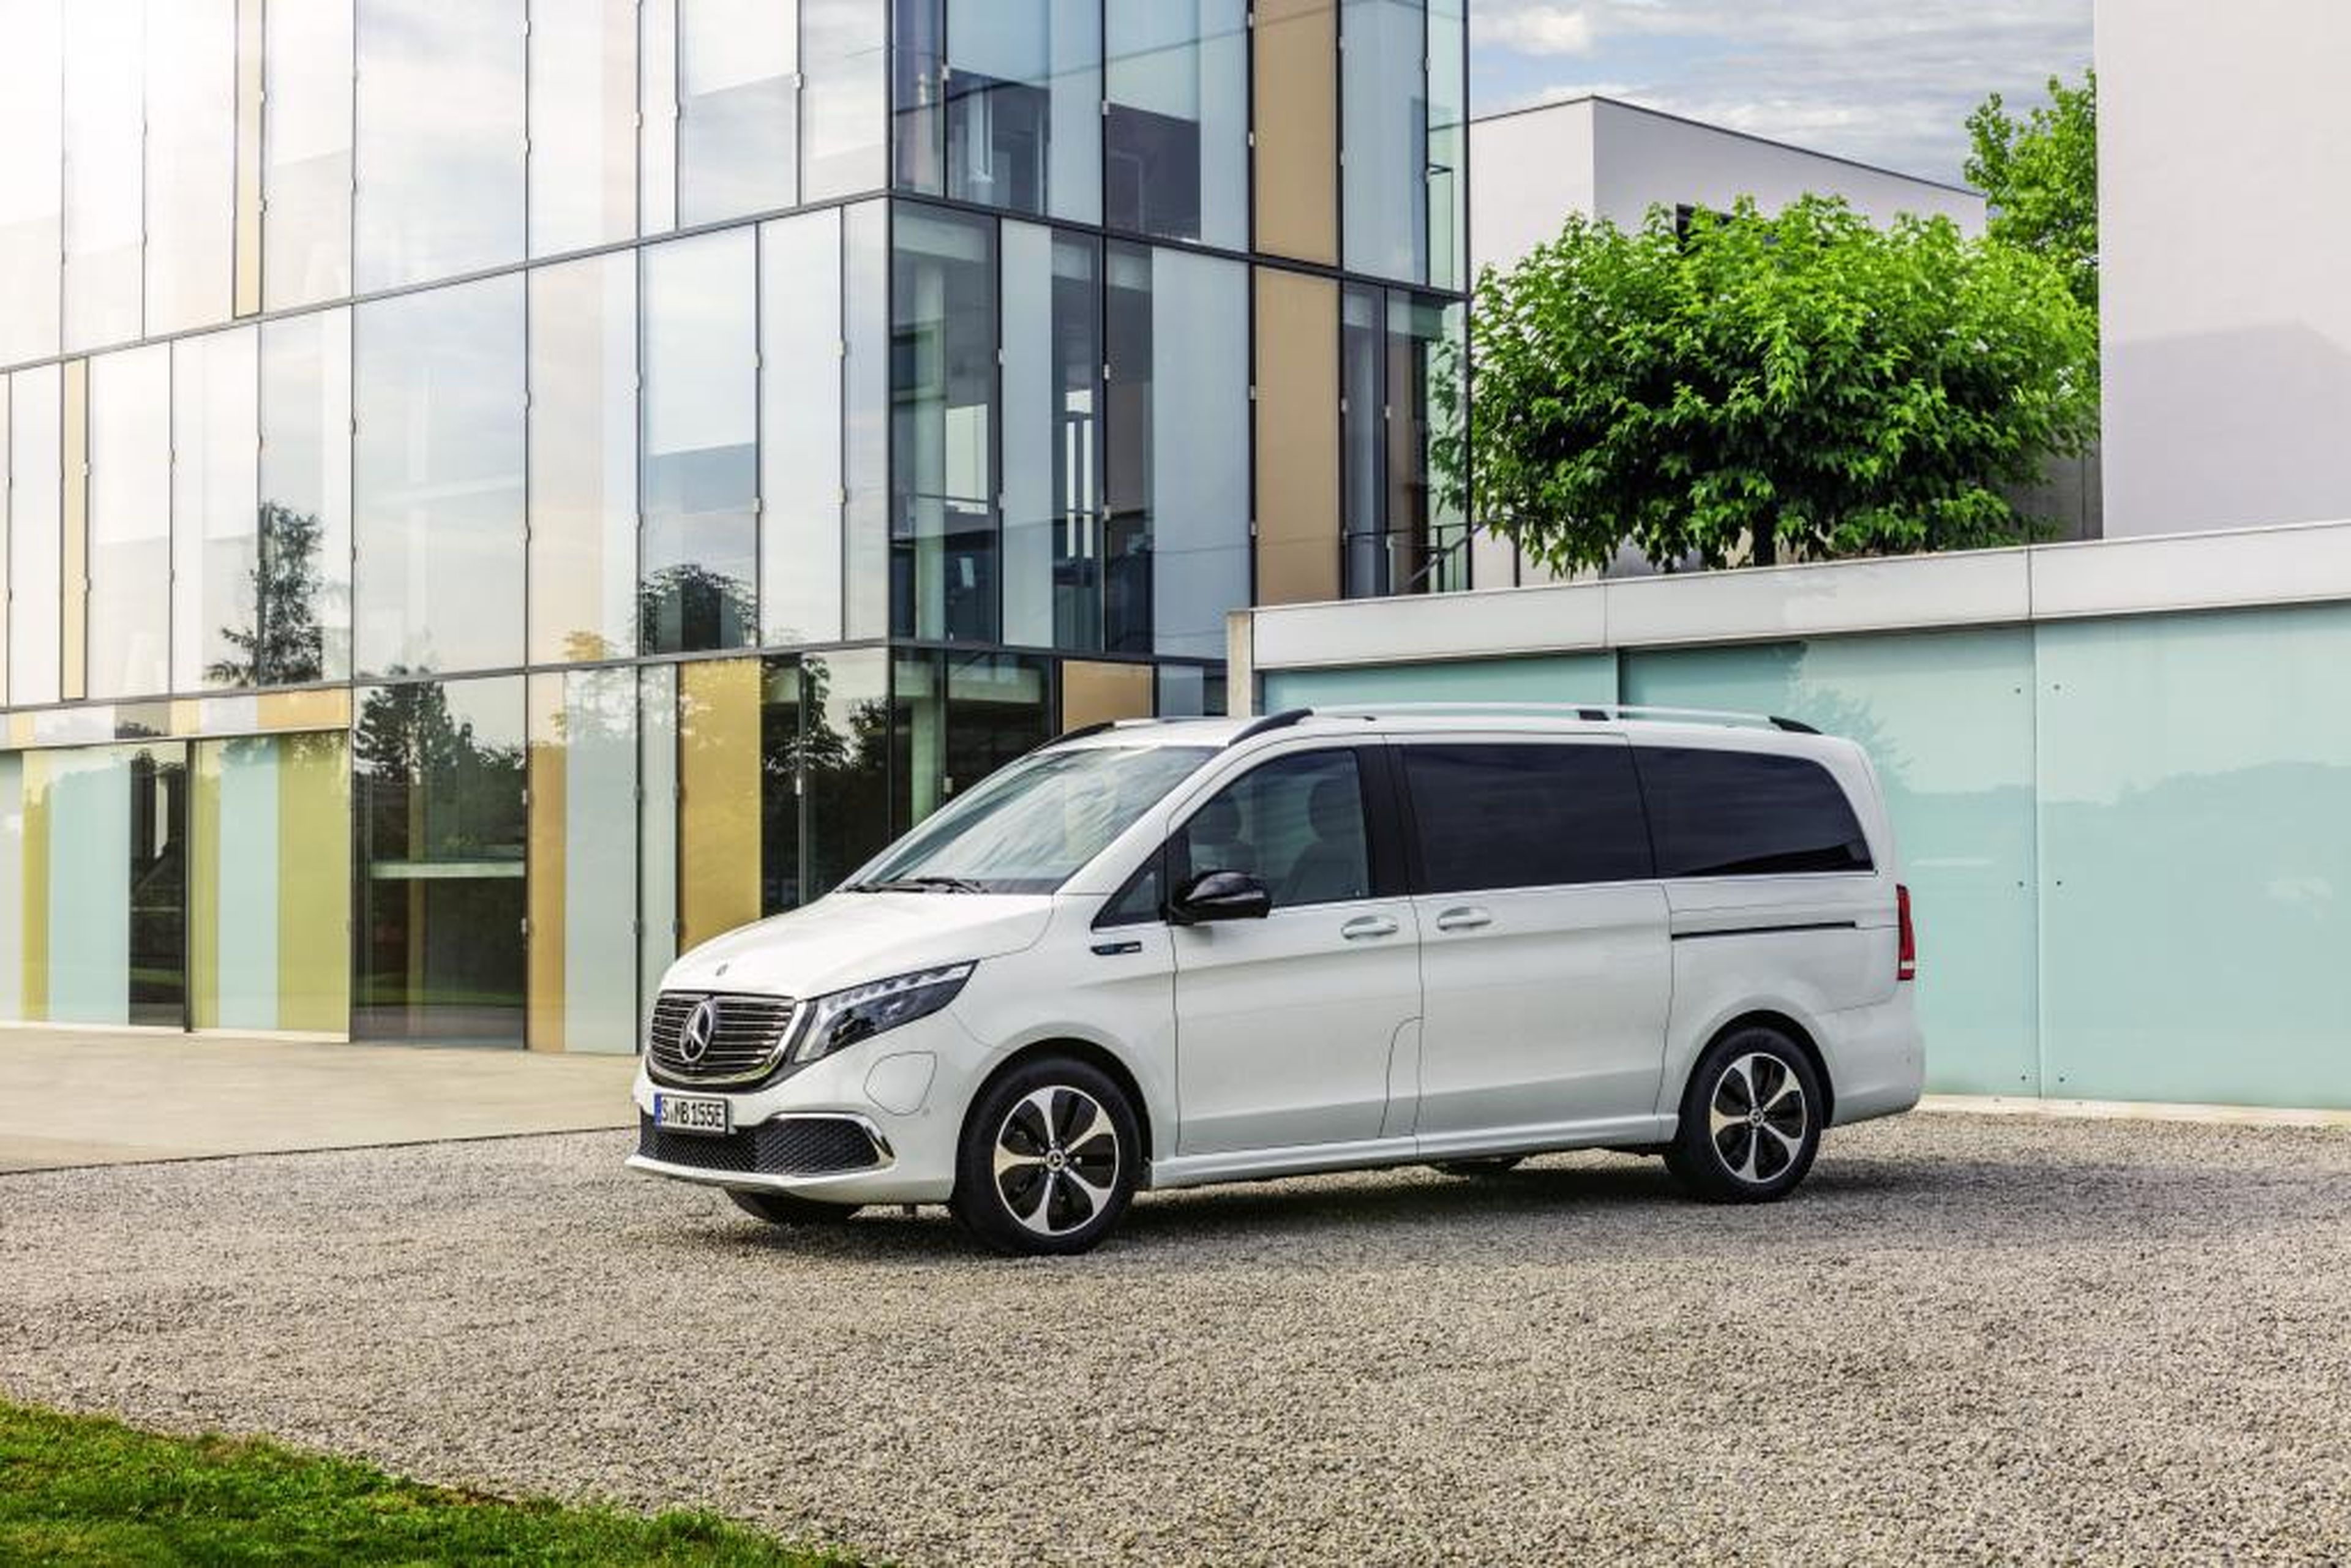 Merc's EQV electric minivan has gone from concept at the Geneva auto show in early 2019 to production vehicle at Frankfurt. Range is estimated to be about 250 miles.